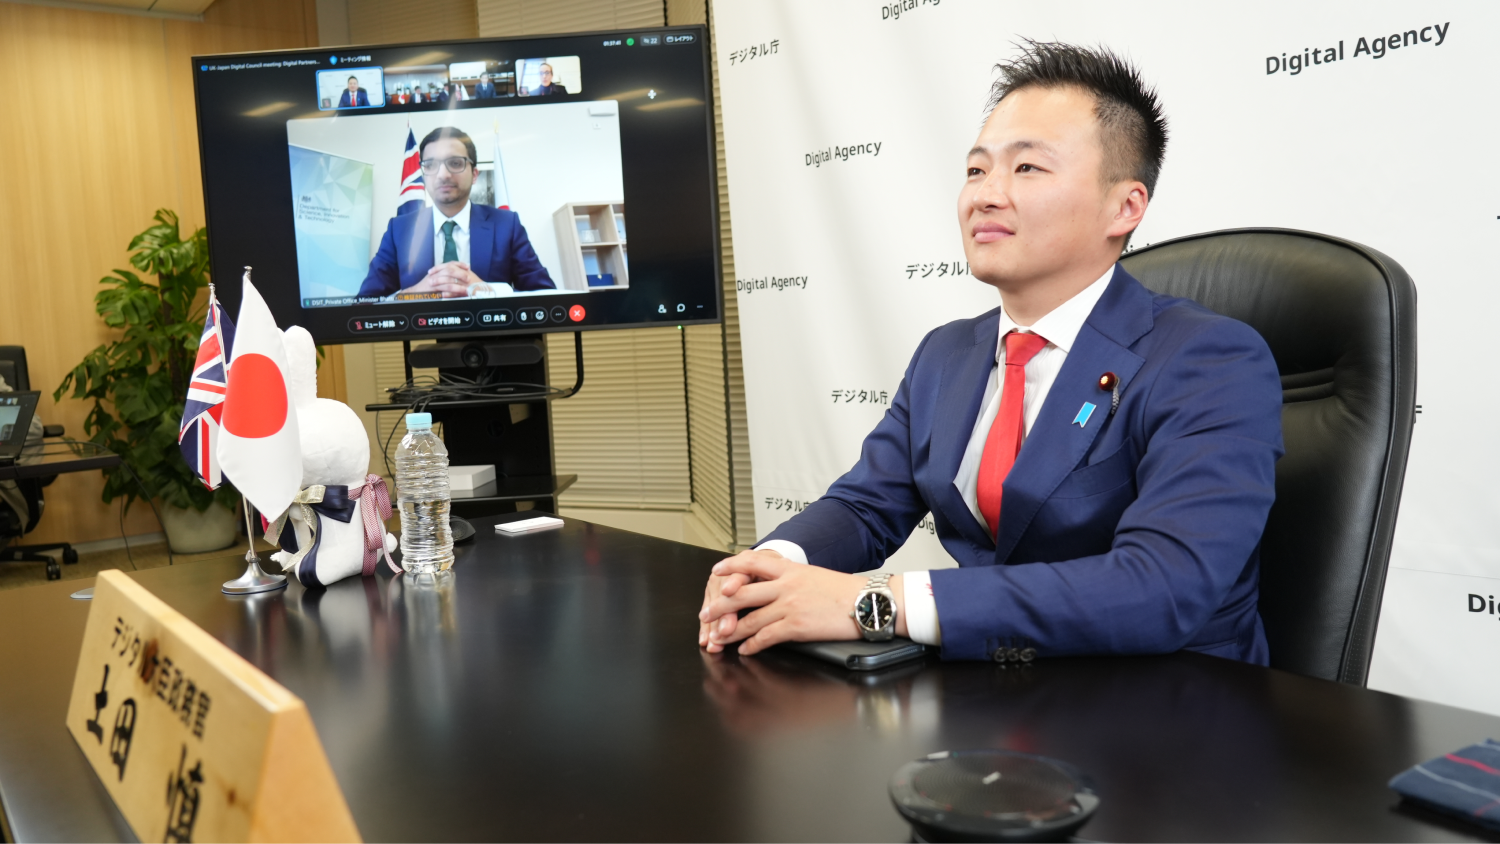 Photo of the Second Japan-UK Digital Partnership Council Online. Parliamentary Secretary Tsuchida is shown in front of the photo; Minister Bhatti is on the screen.